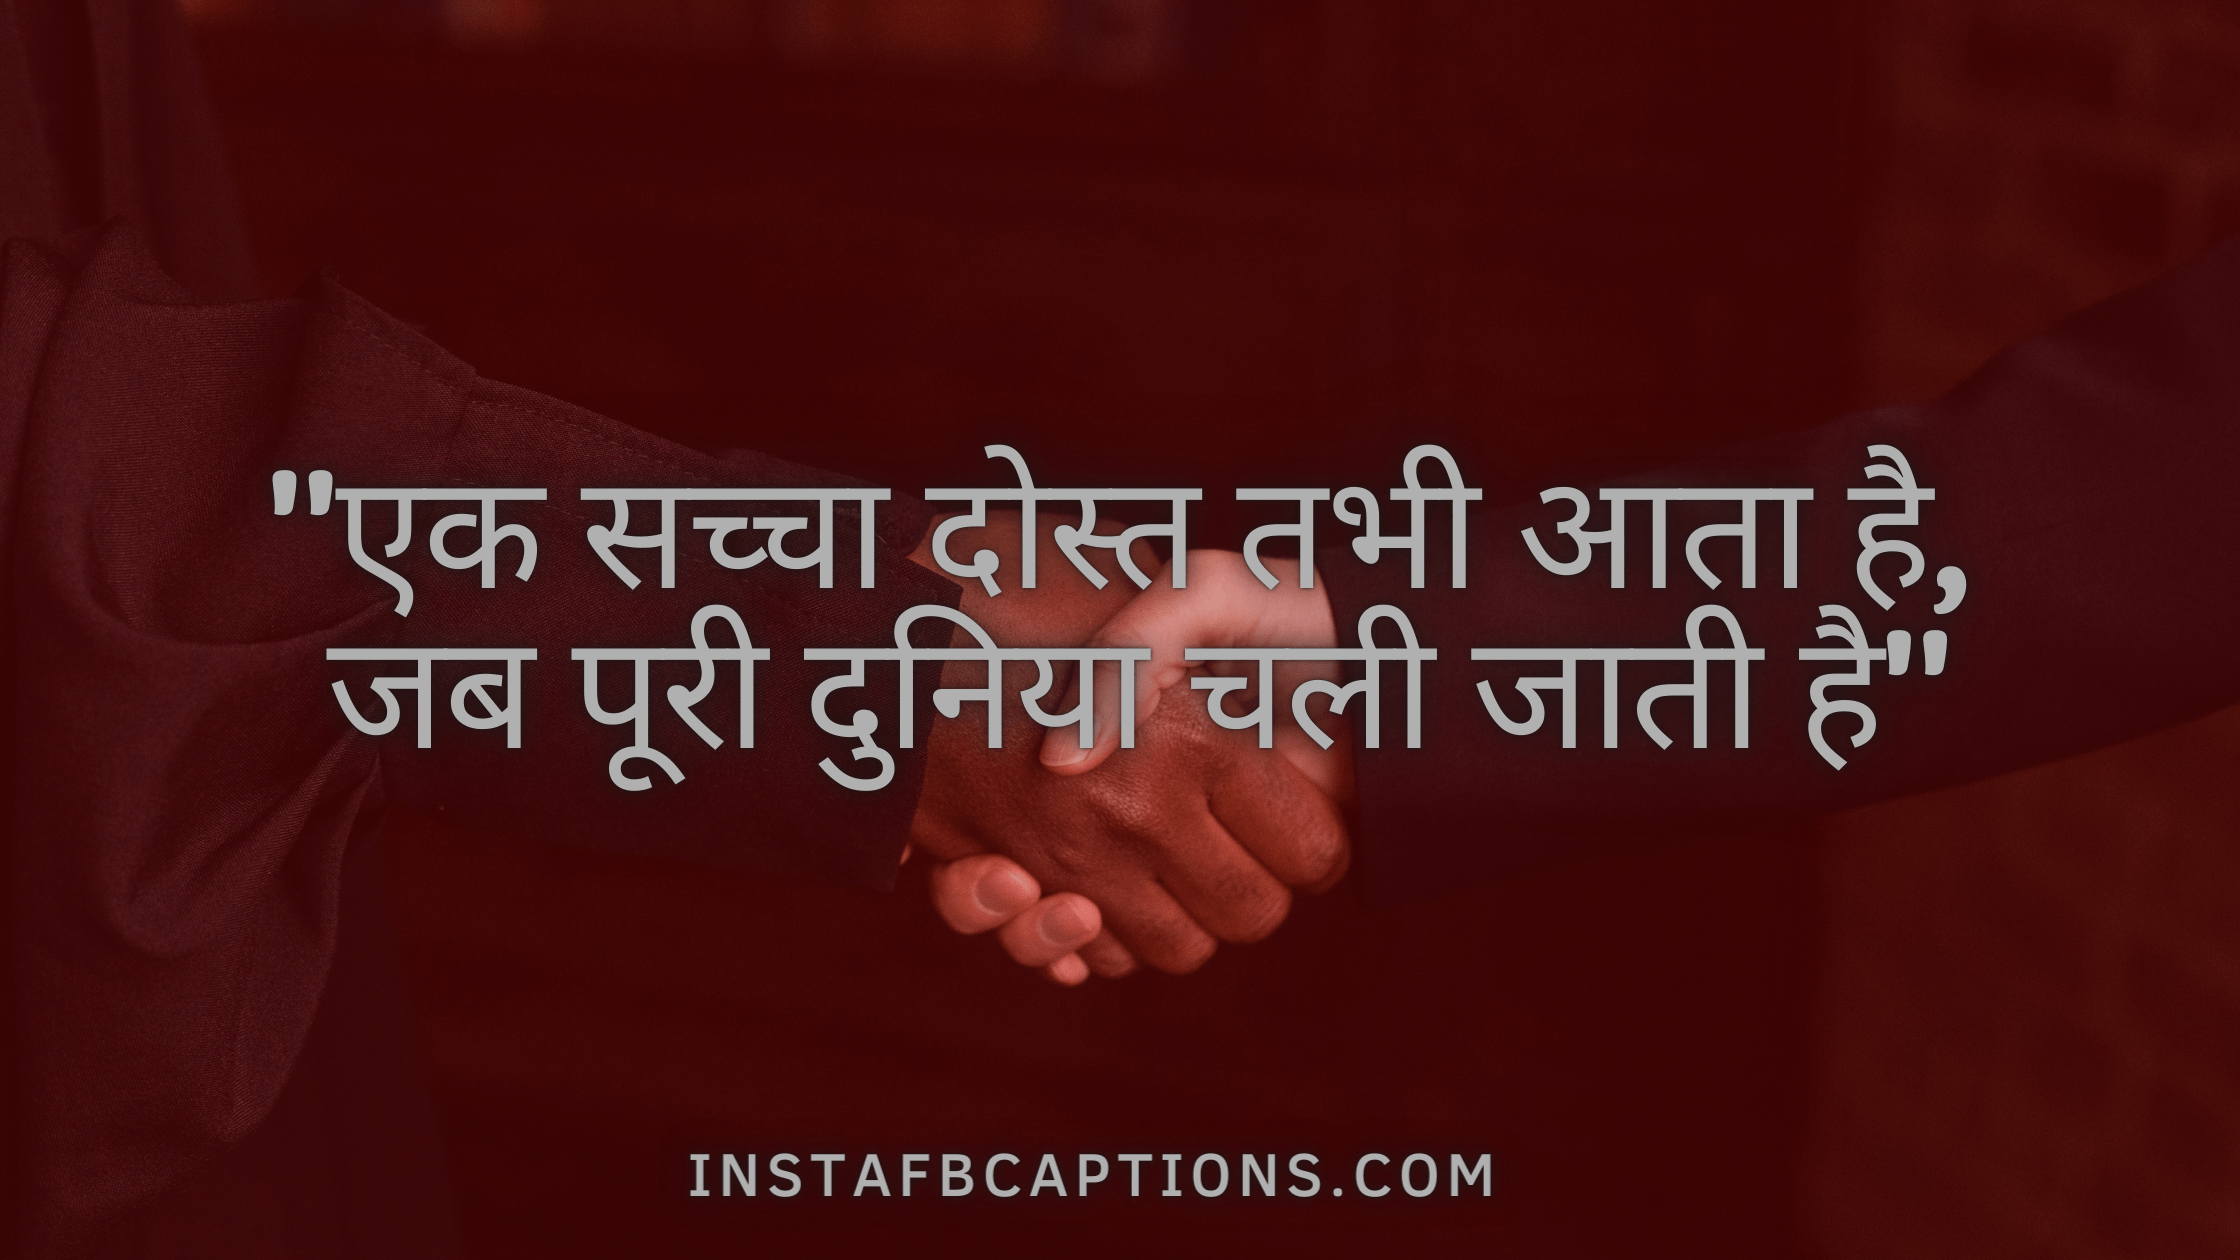 Unbreakable Friendship Bond Quotes In Hindi  - Unbreakable Friendship bond Quotes in Hindi - Unbreakable Friendship Bond Captions for Instagram in 2023